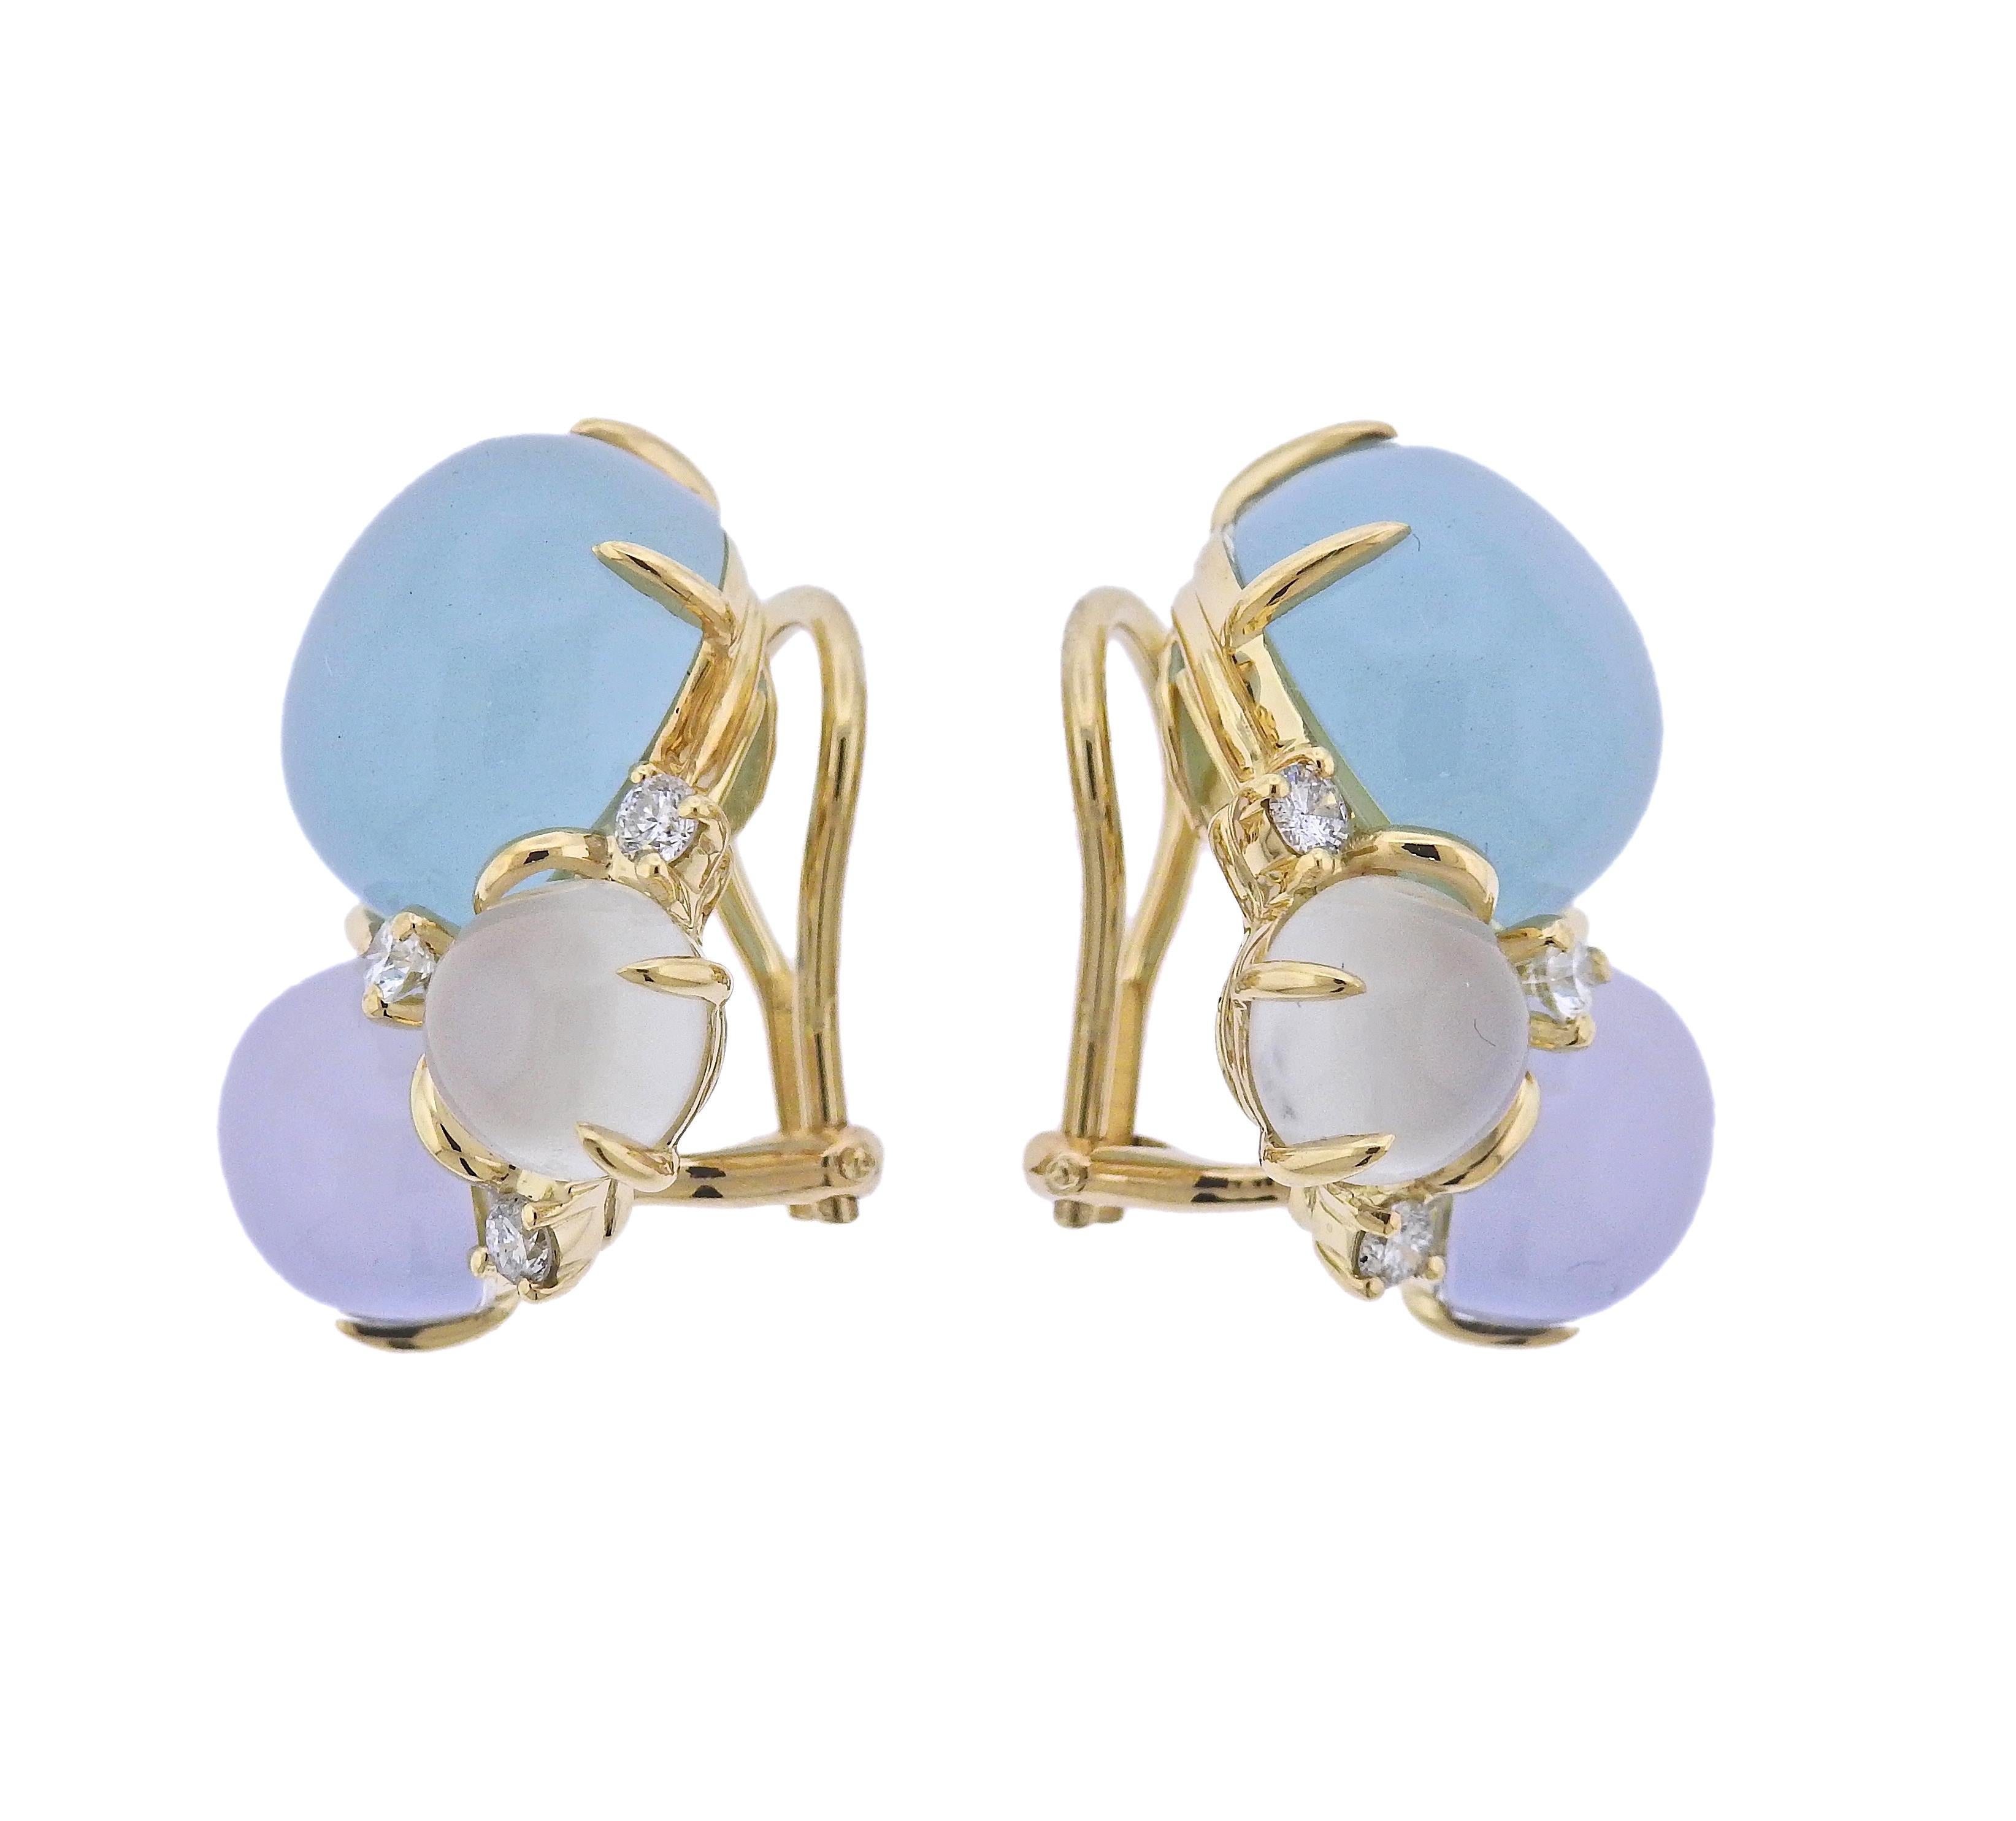 Pair of brand new Seaman Schepps 18k gold earrings, with 20.40ctw aquamarine, 8.98ctw chalcedony, 5.54ctw moonstone and 0.62ctw G/VS diamonds. Come with packaging. Earrings are 24mm x 19mm. Marked: 48447, 750, Shell, Seaman Schepps. Weight - 17.3